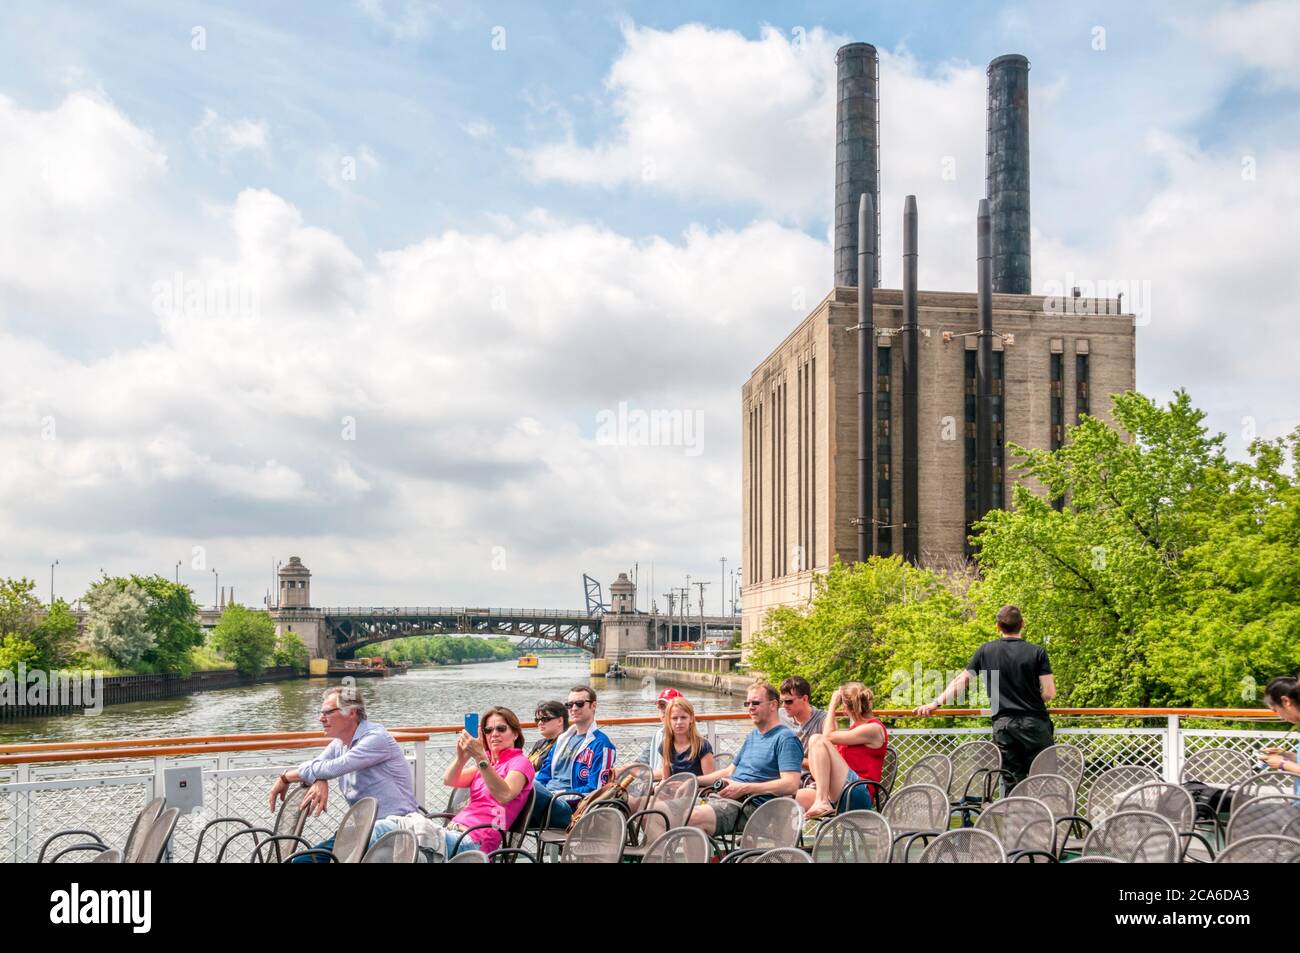 Visitors on an architectural boat tour of Chicago in front of the iconic Union Station power house. Designed in 1931 in the Art Moderne style. Stock Photo